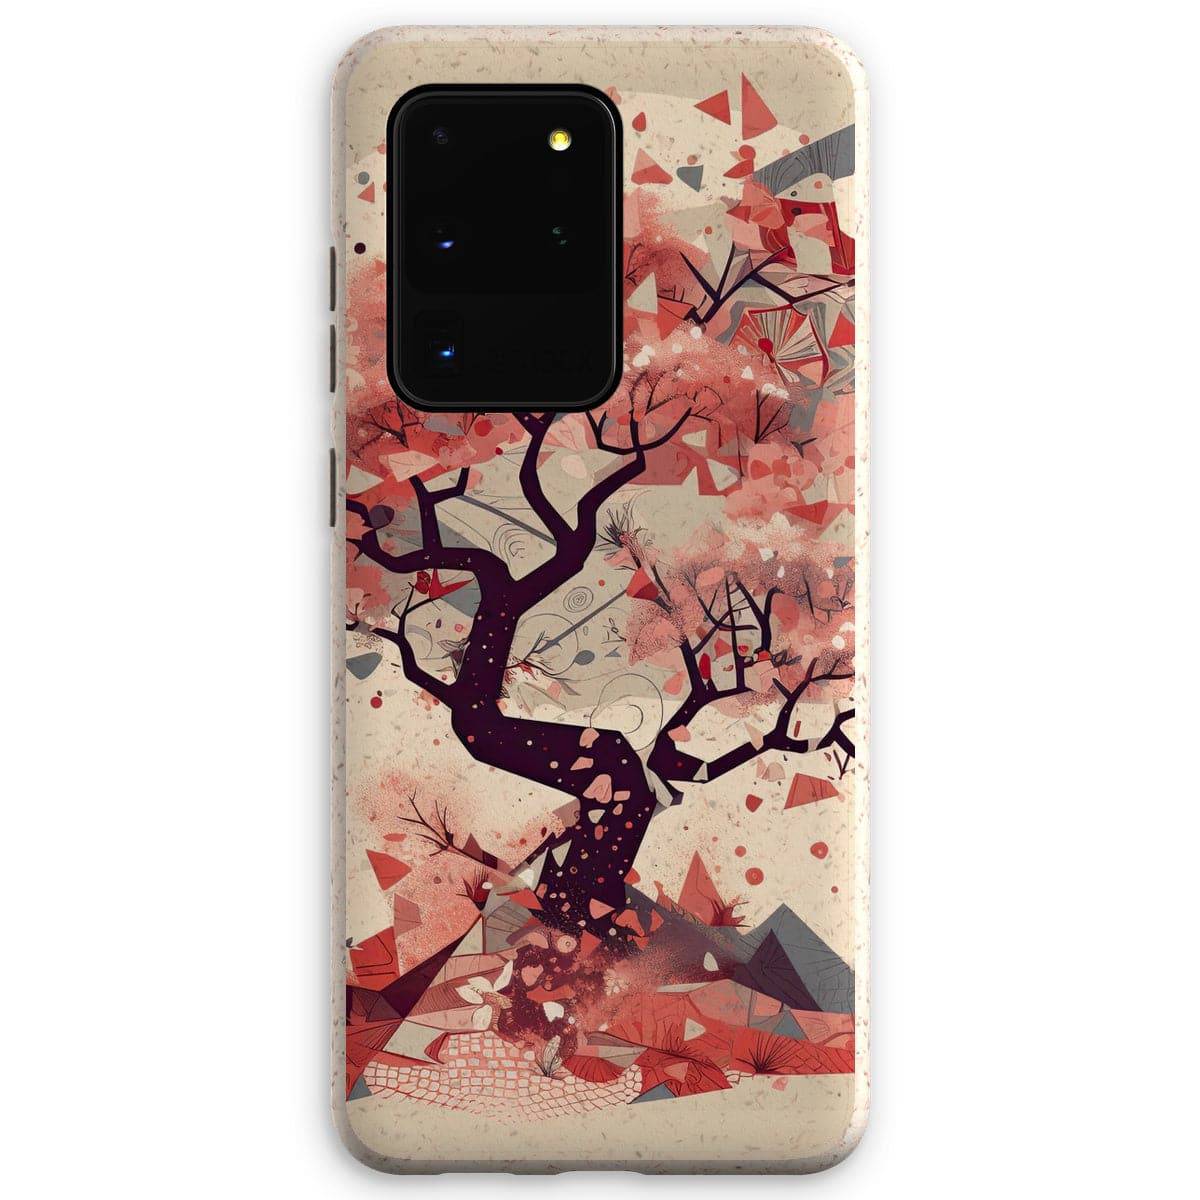 Ikigai Inspired Cherry Blossom Painting Eco Phone Case - Pixel Gallery